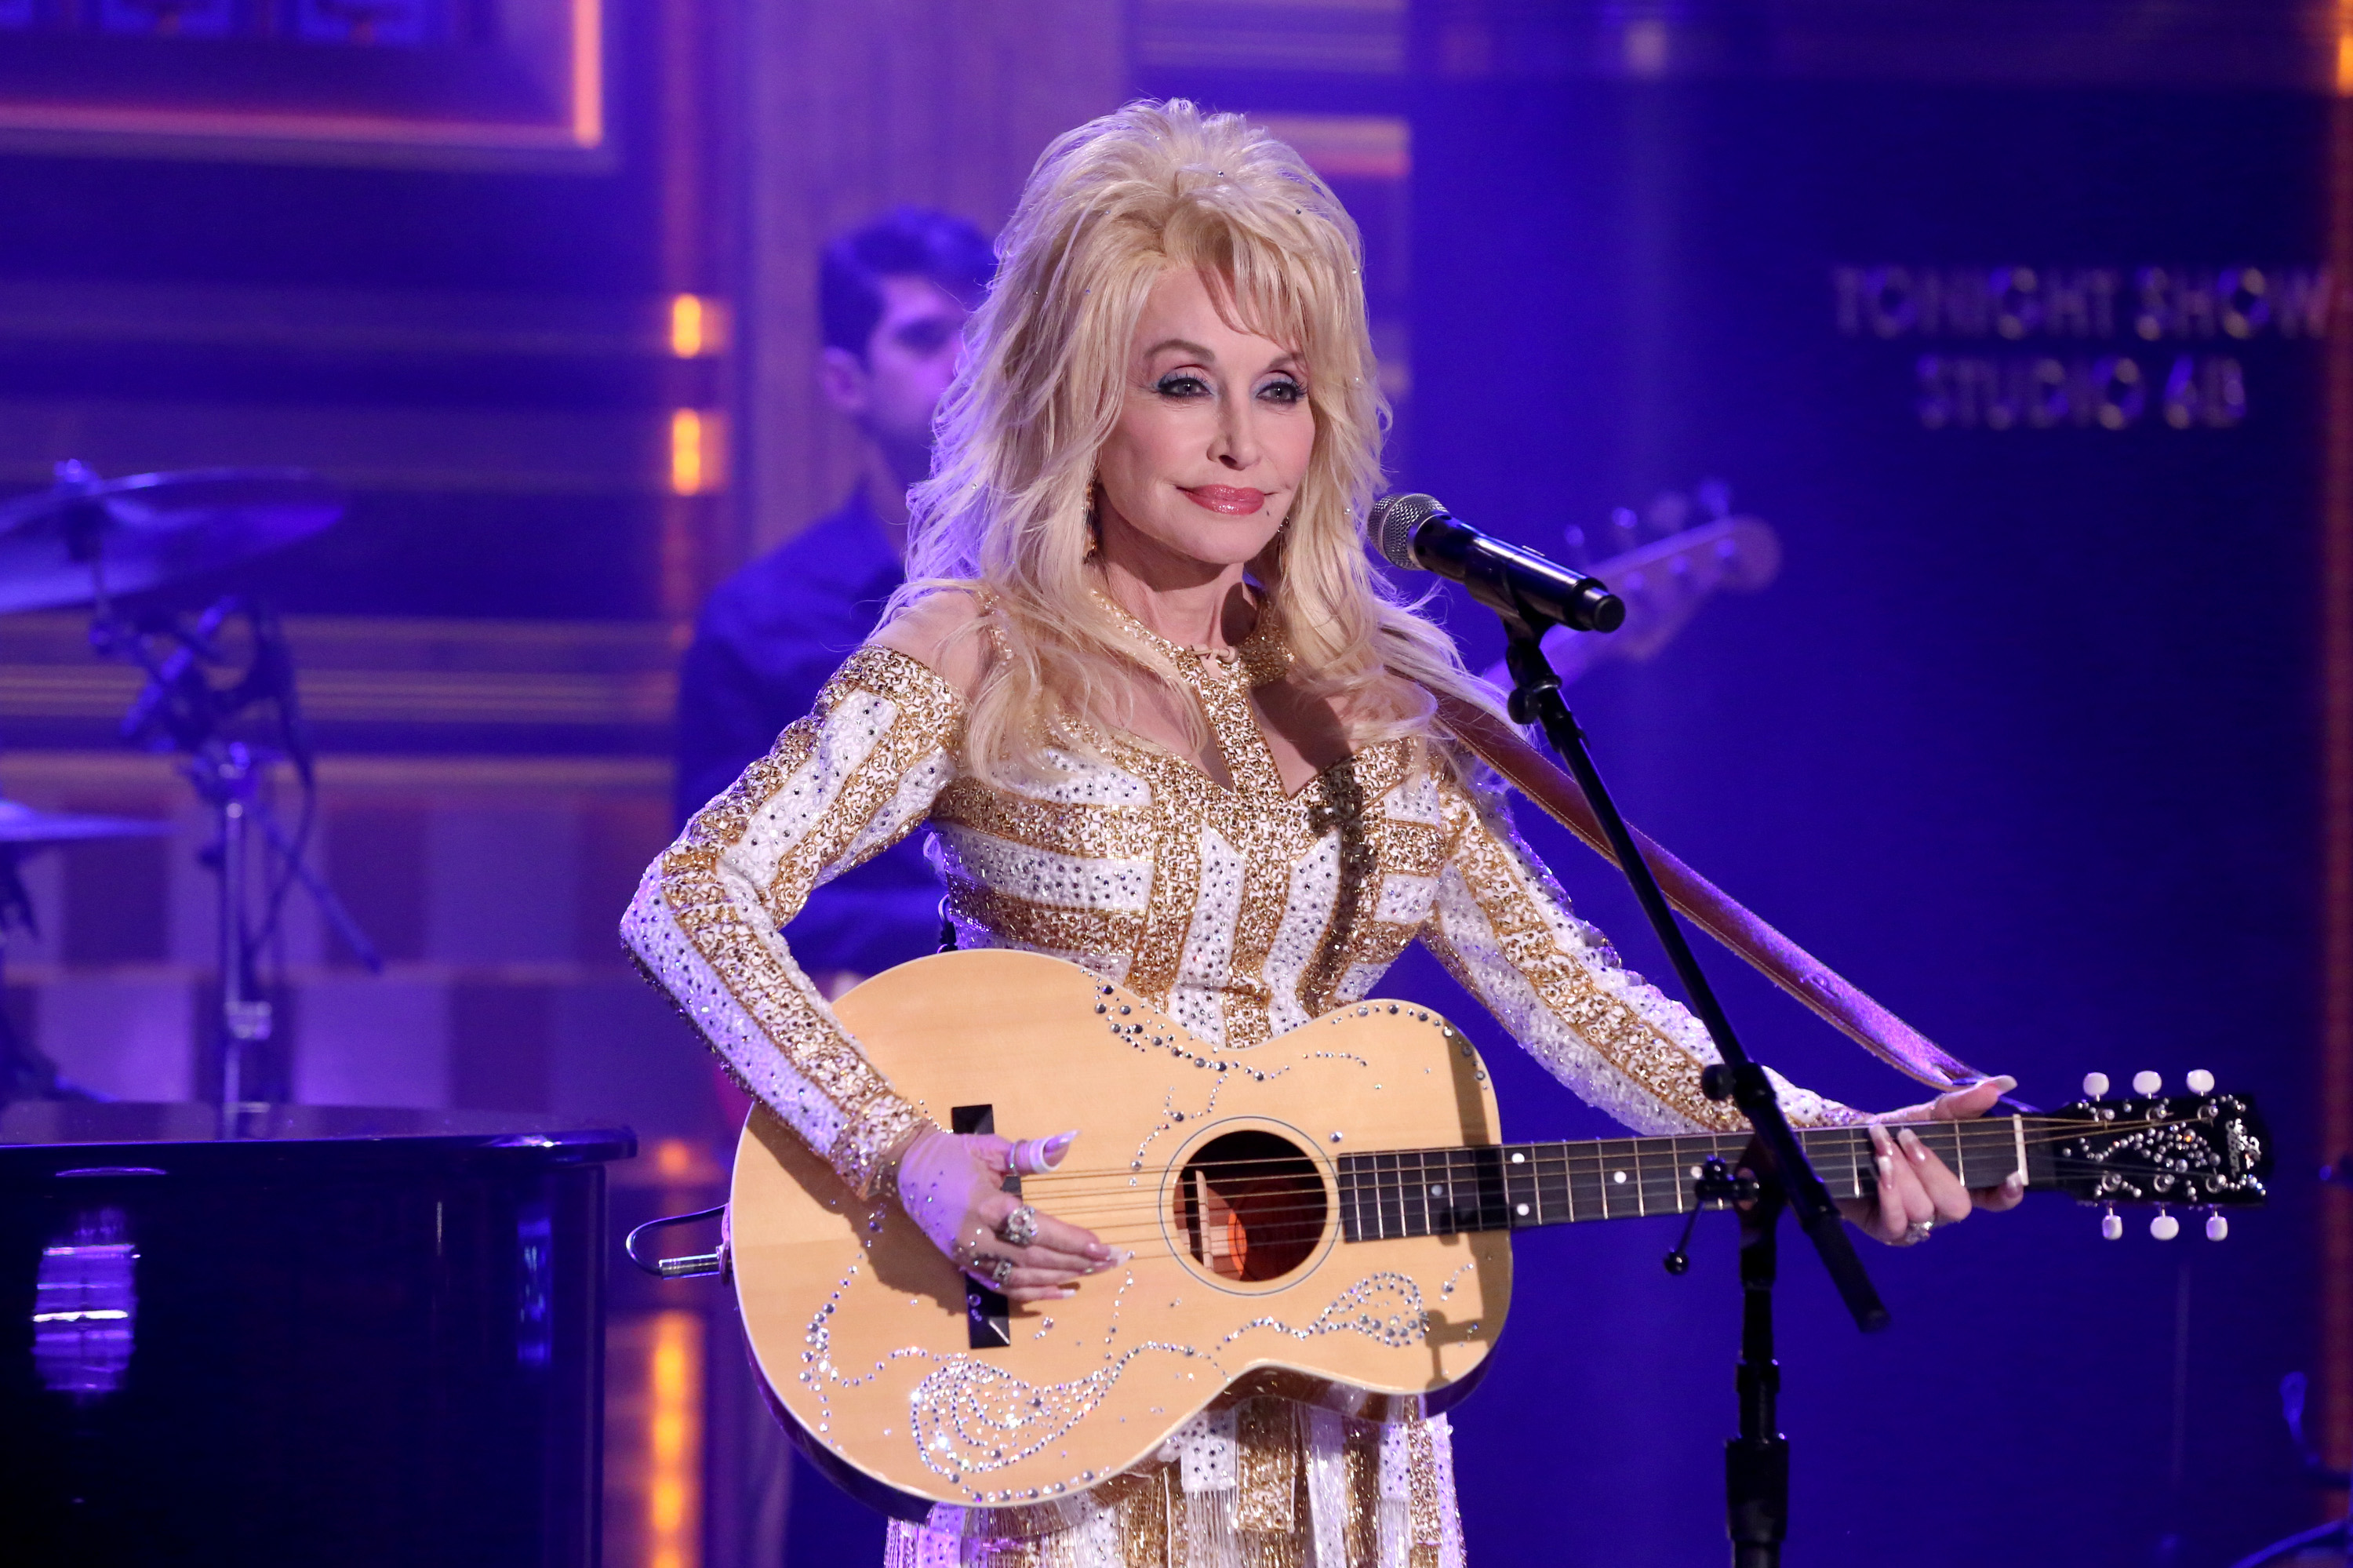 Dolly Parton on stage at 'The Tonight Show.' She's holding a guitar.